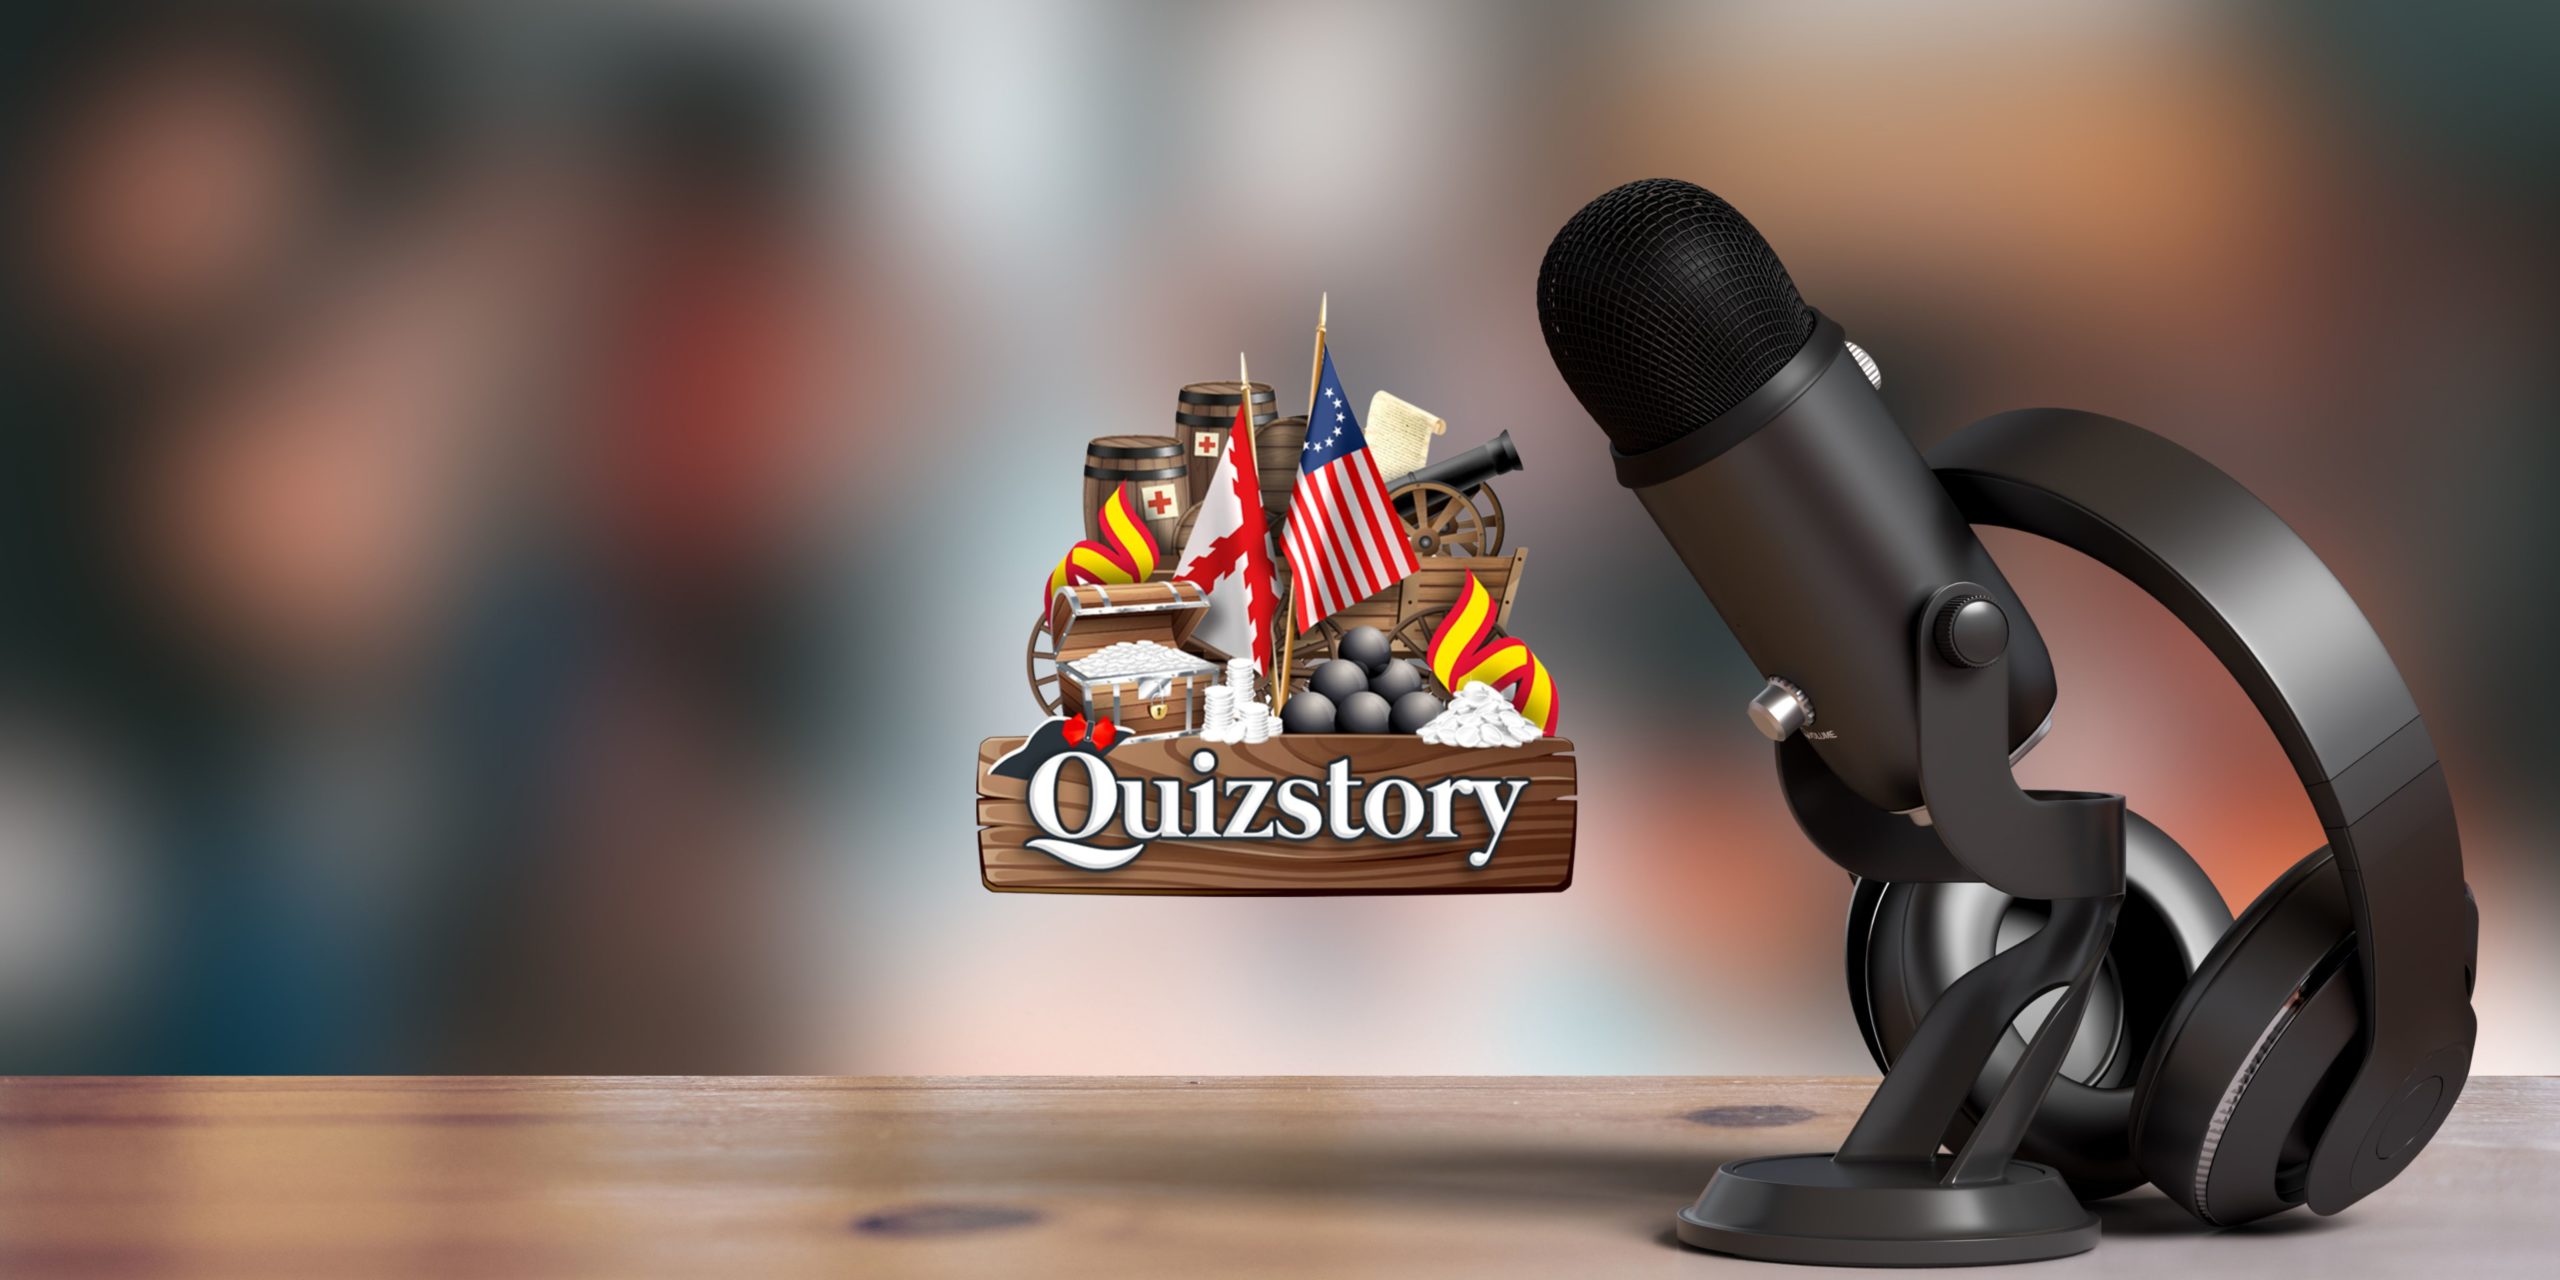 Comunidad de Madrid Opens the Quizstory Podcast Awards Competition